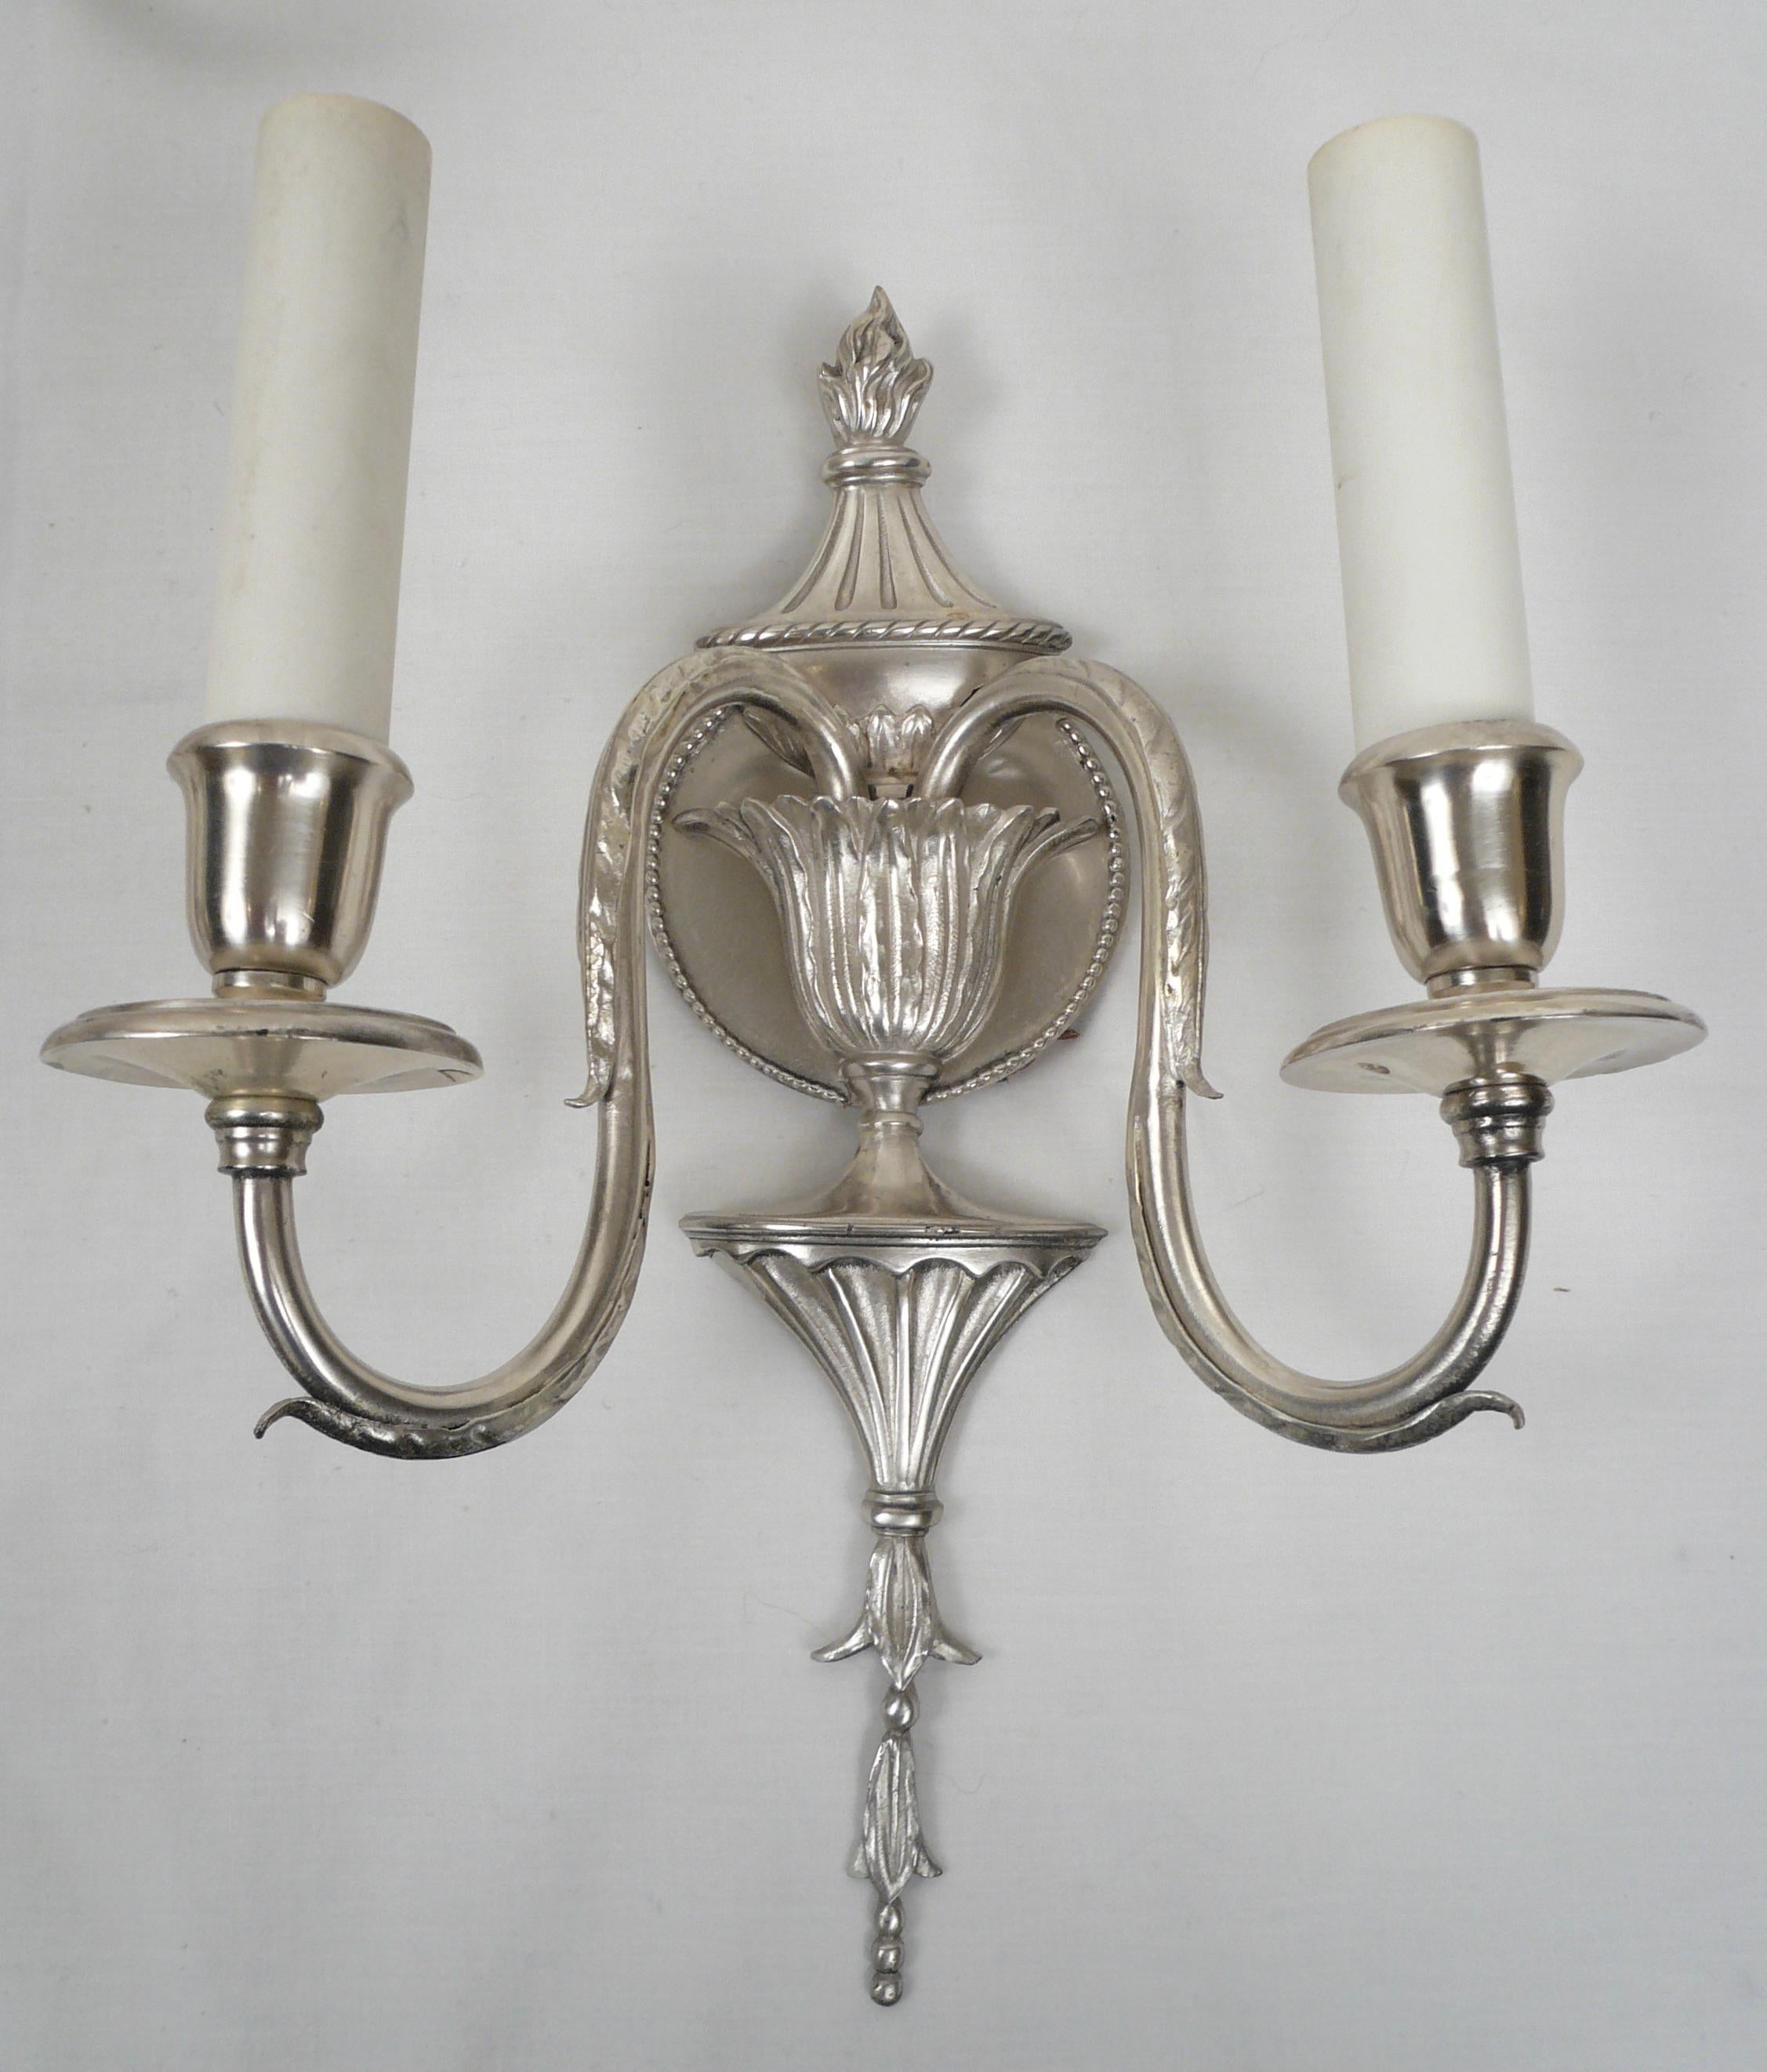 This set of four signed Caldwell silver sconces feature classic Georgian details made popular by Robert Adam, that include acanthus leaves and bellflowers.